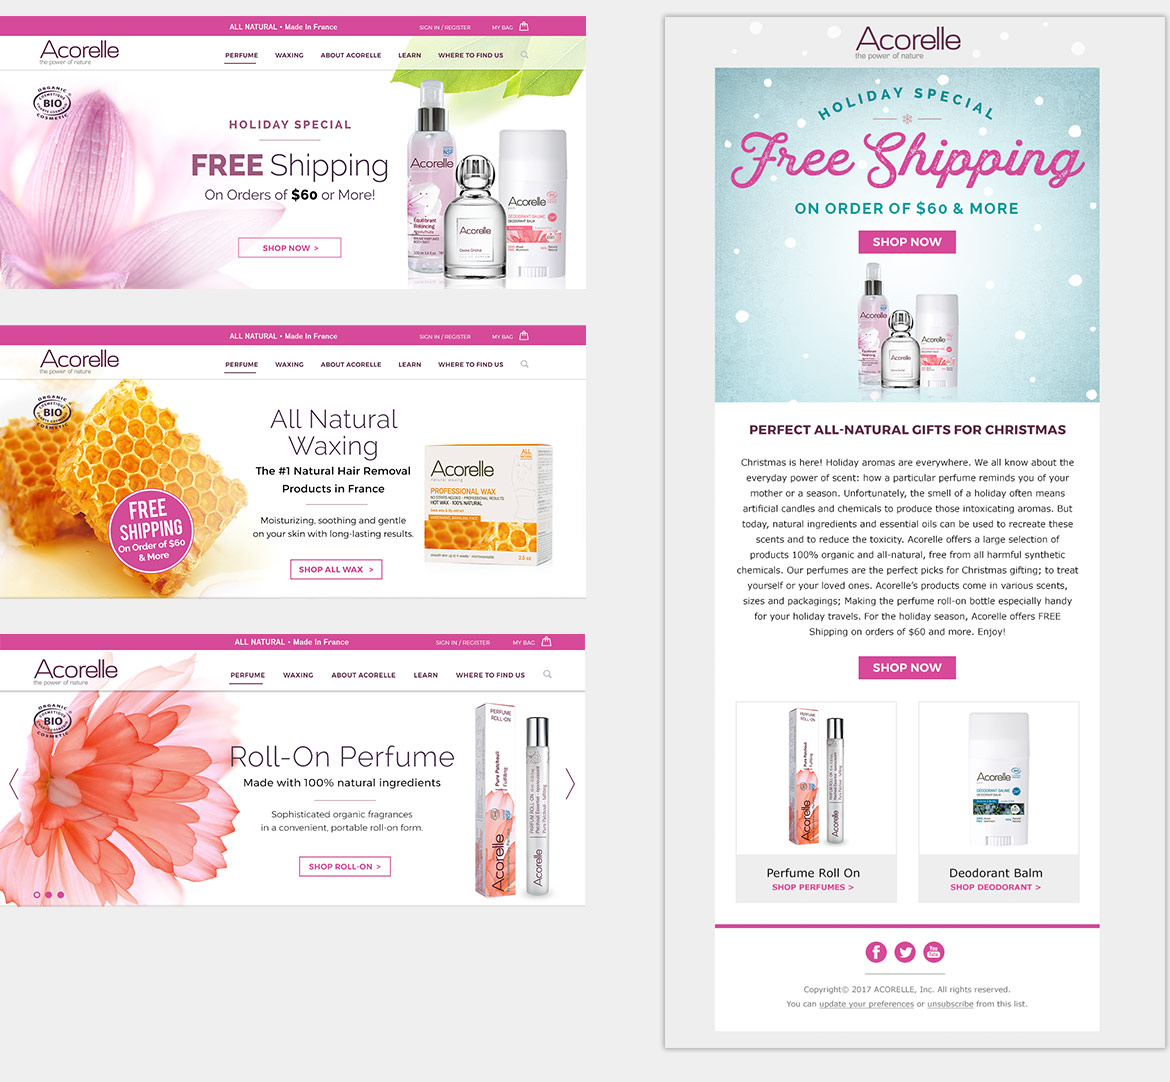 acorelle USA the power of nature ppc campaign online marketing